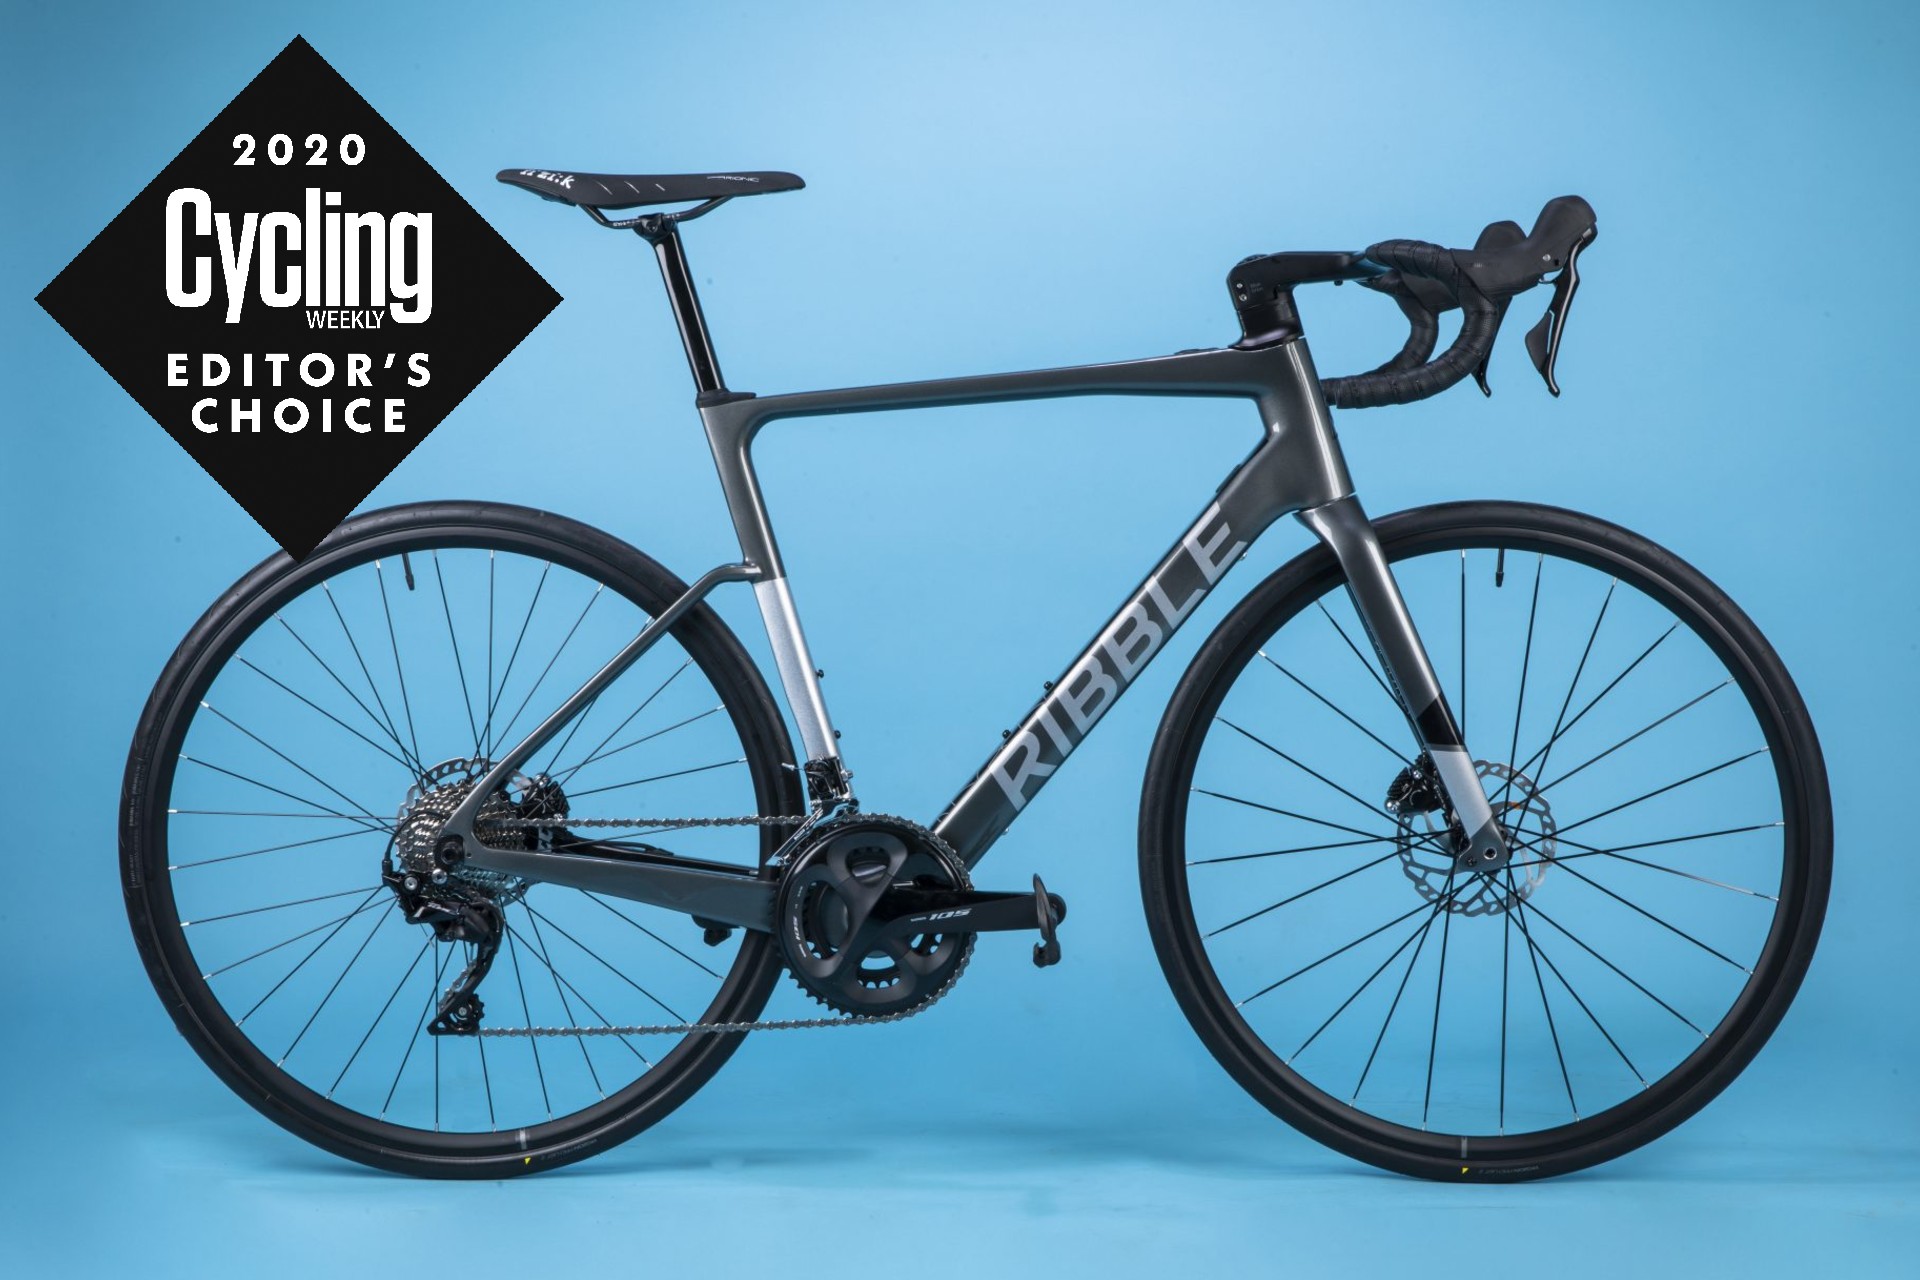 Gemme Junior Afslut Ribble Endurance SL e review | Cycling Weekly